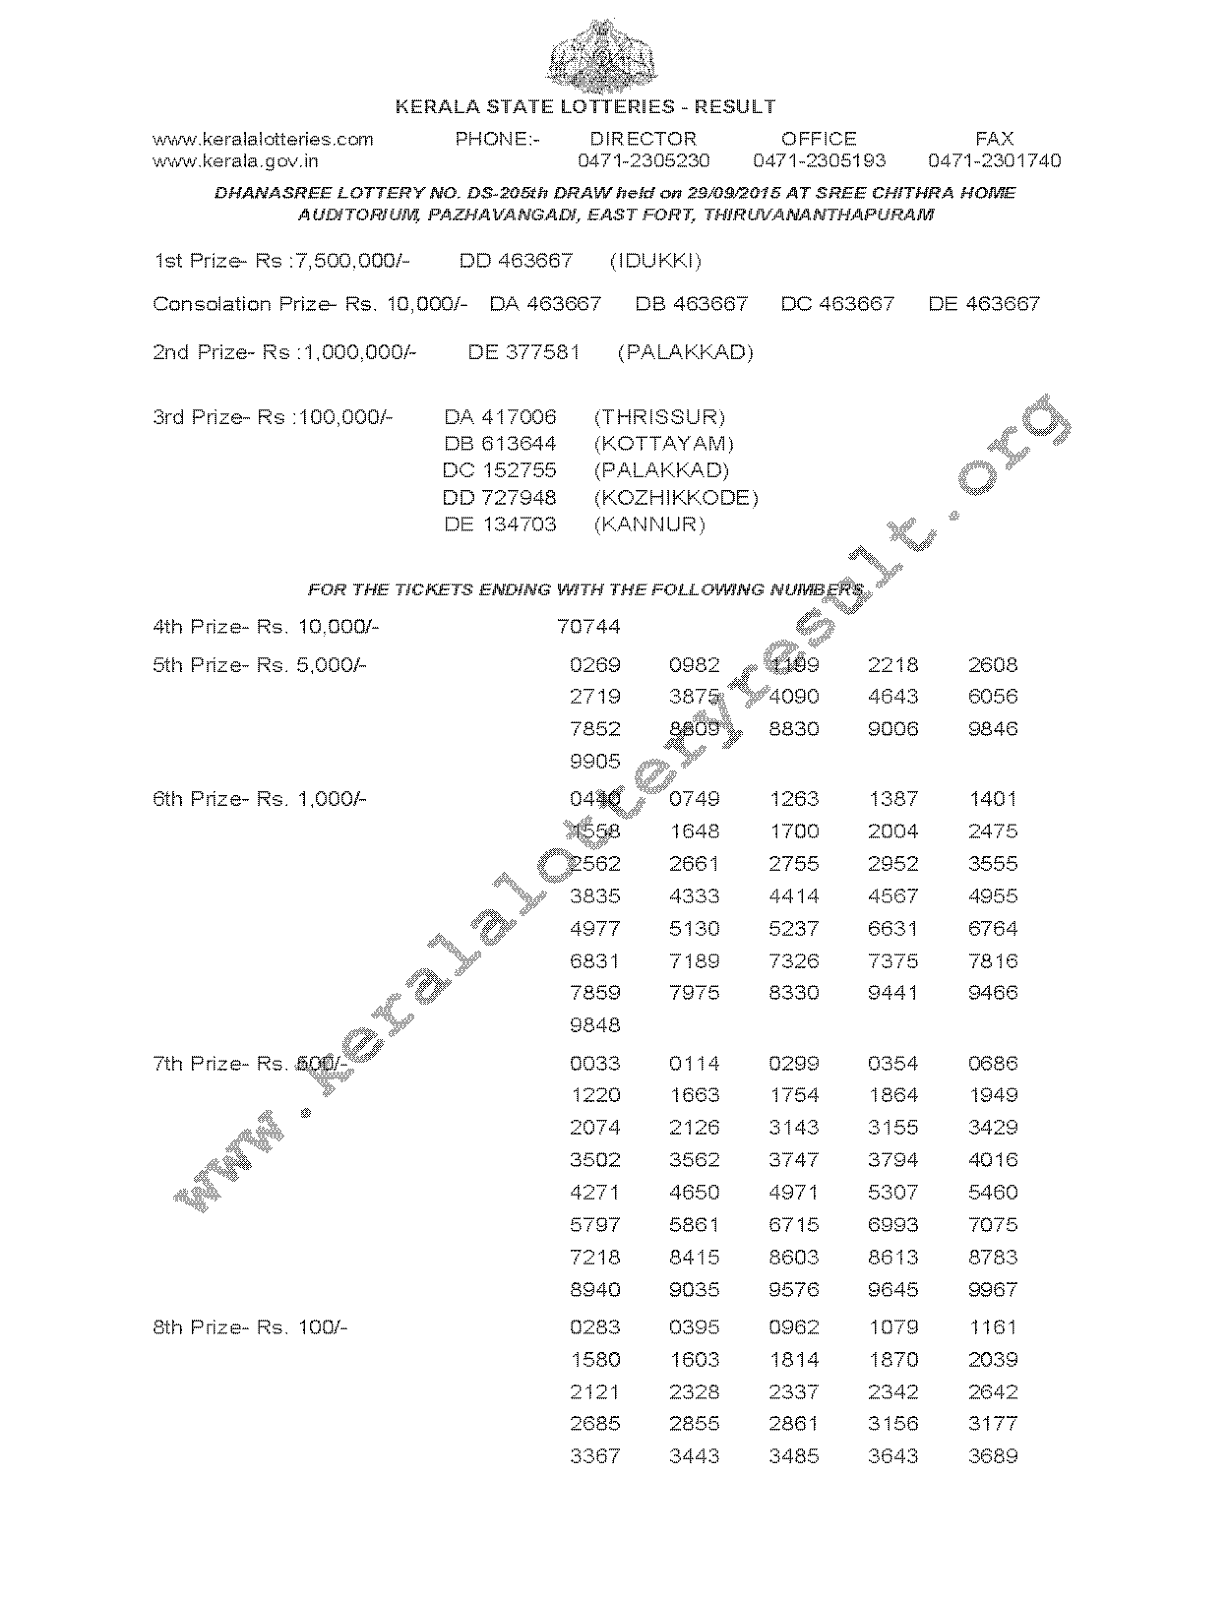 DHANASREE Lottery DS 205 Result 29-9-2015